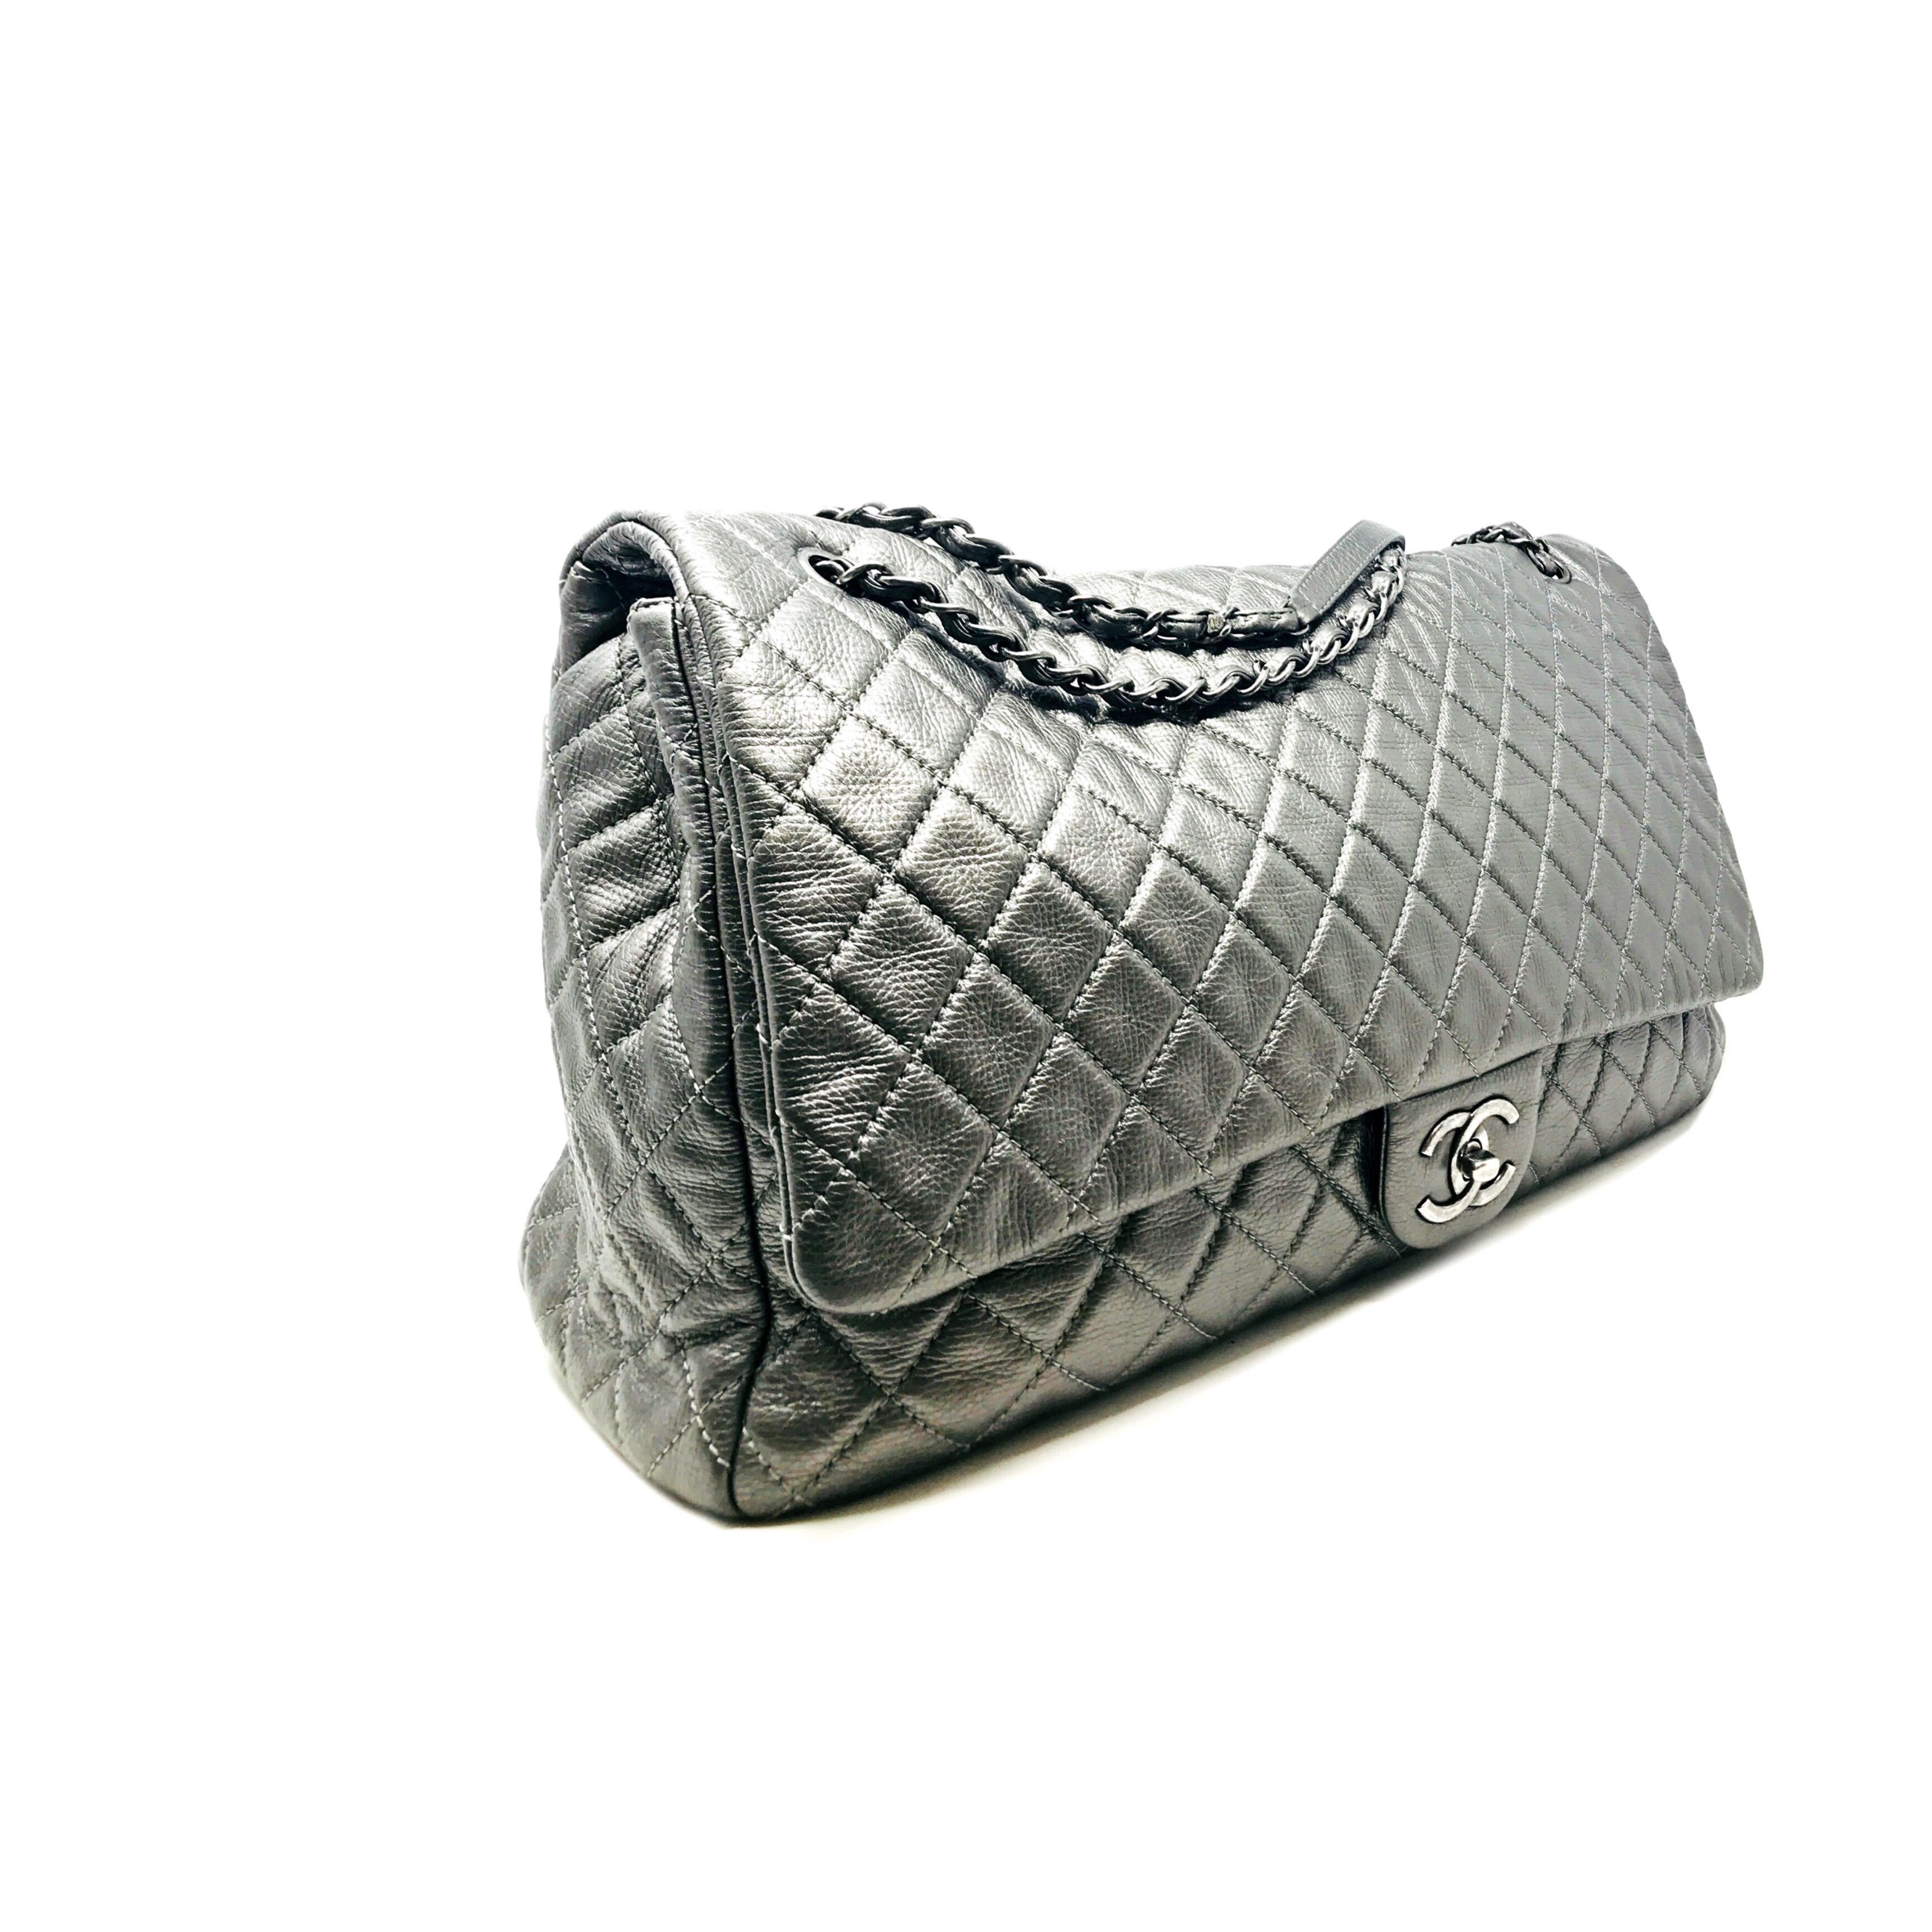 CHANEL PARIS XXL BAG His Weekender bag from Chanel in a silver leather  will make you forget all the other bags you have seen or liked. It is spacious and durable and is crafted from leather  with the signature quilted pattern.  The interior of the